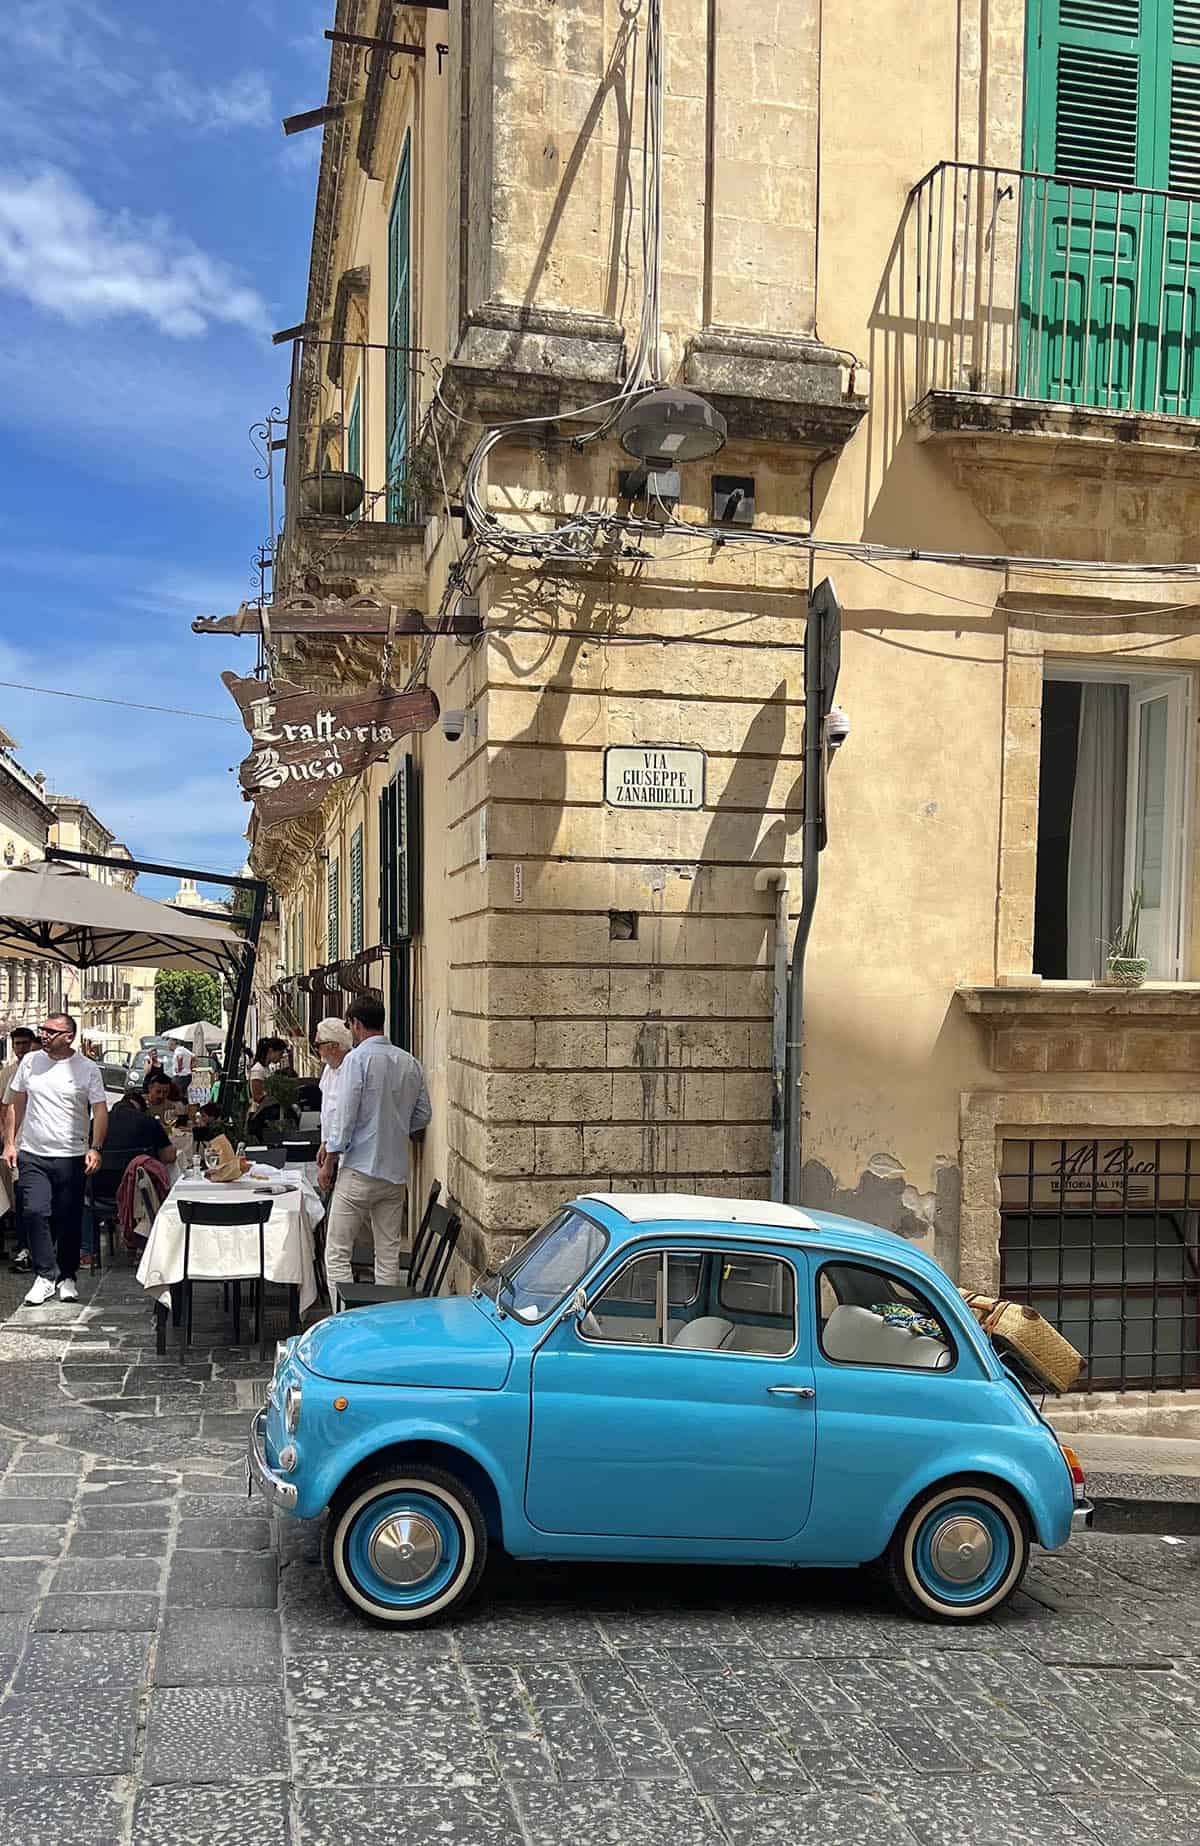 An image of an old blue Italian car on a street in Noto, Sicily.